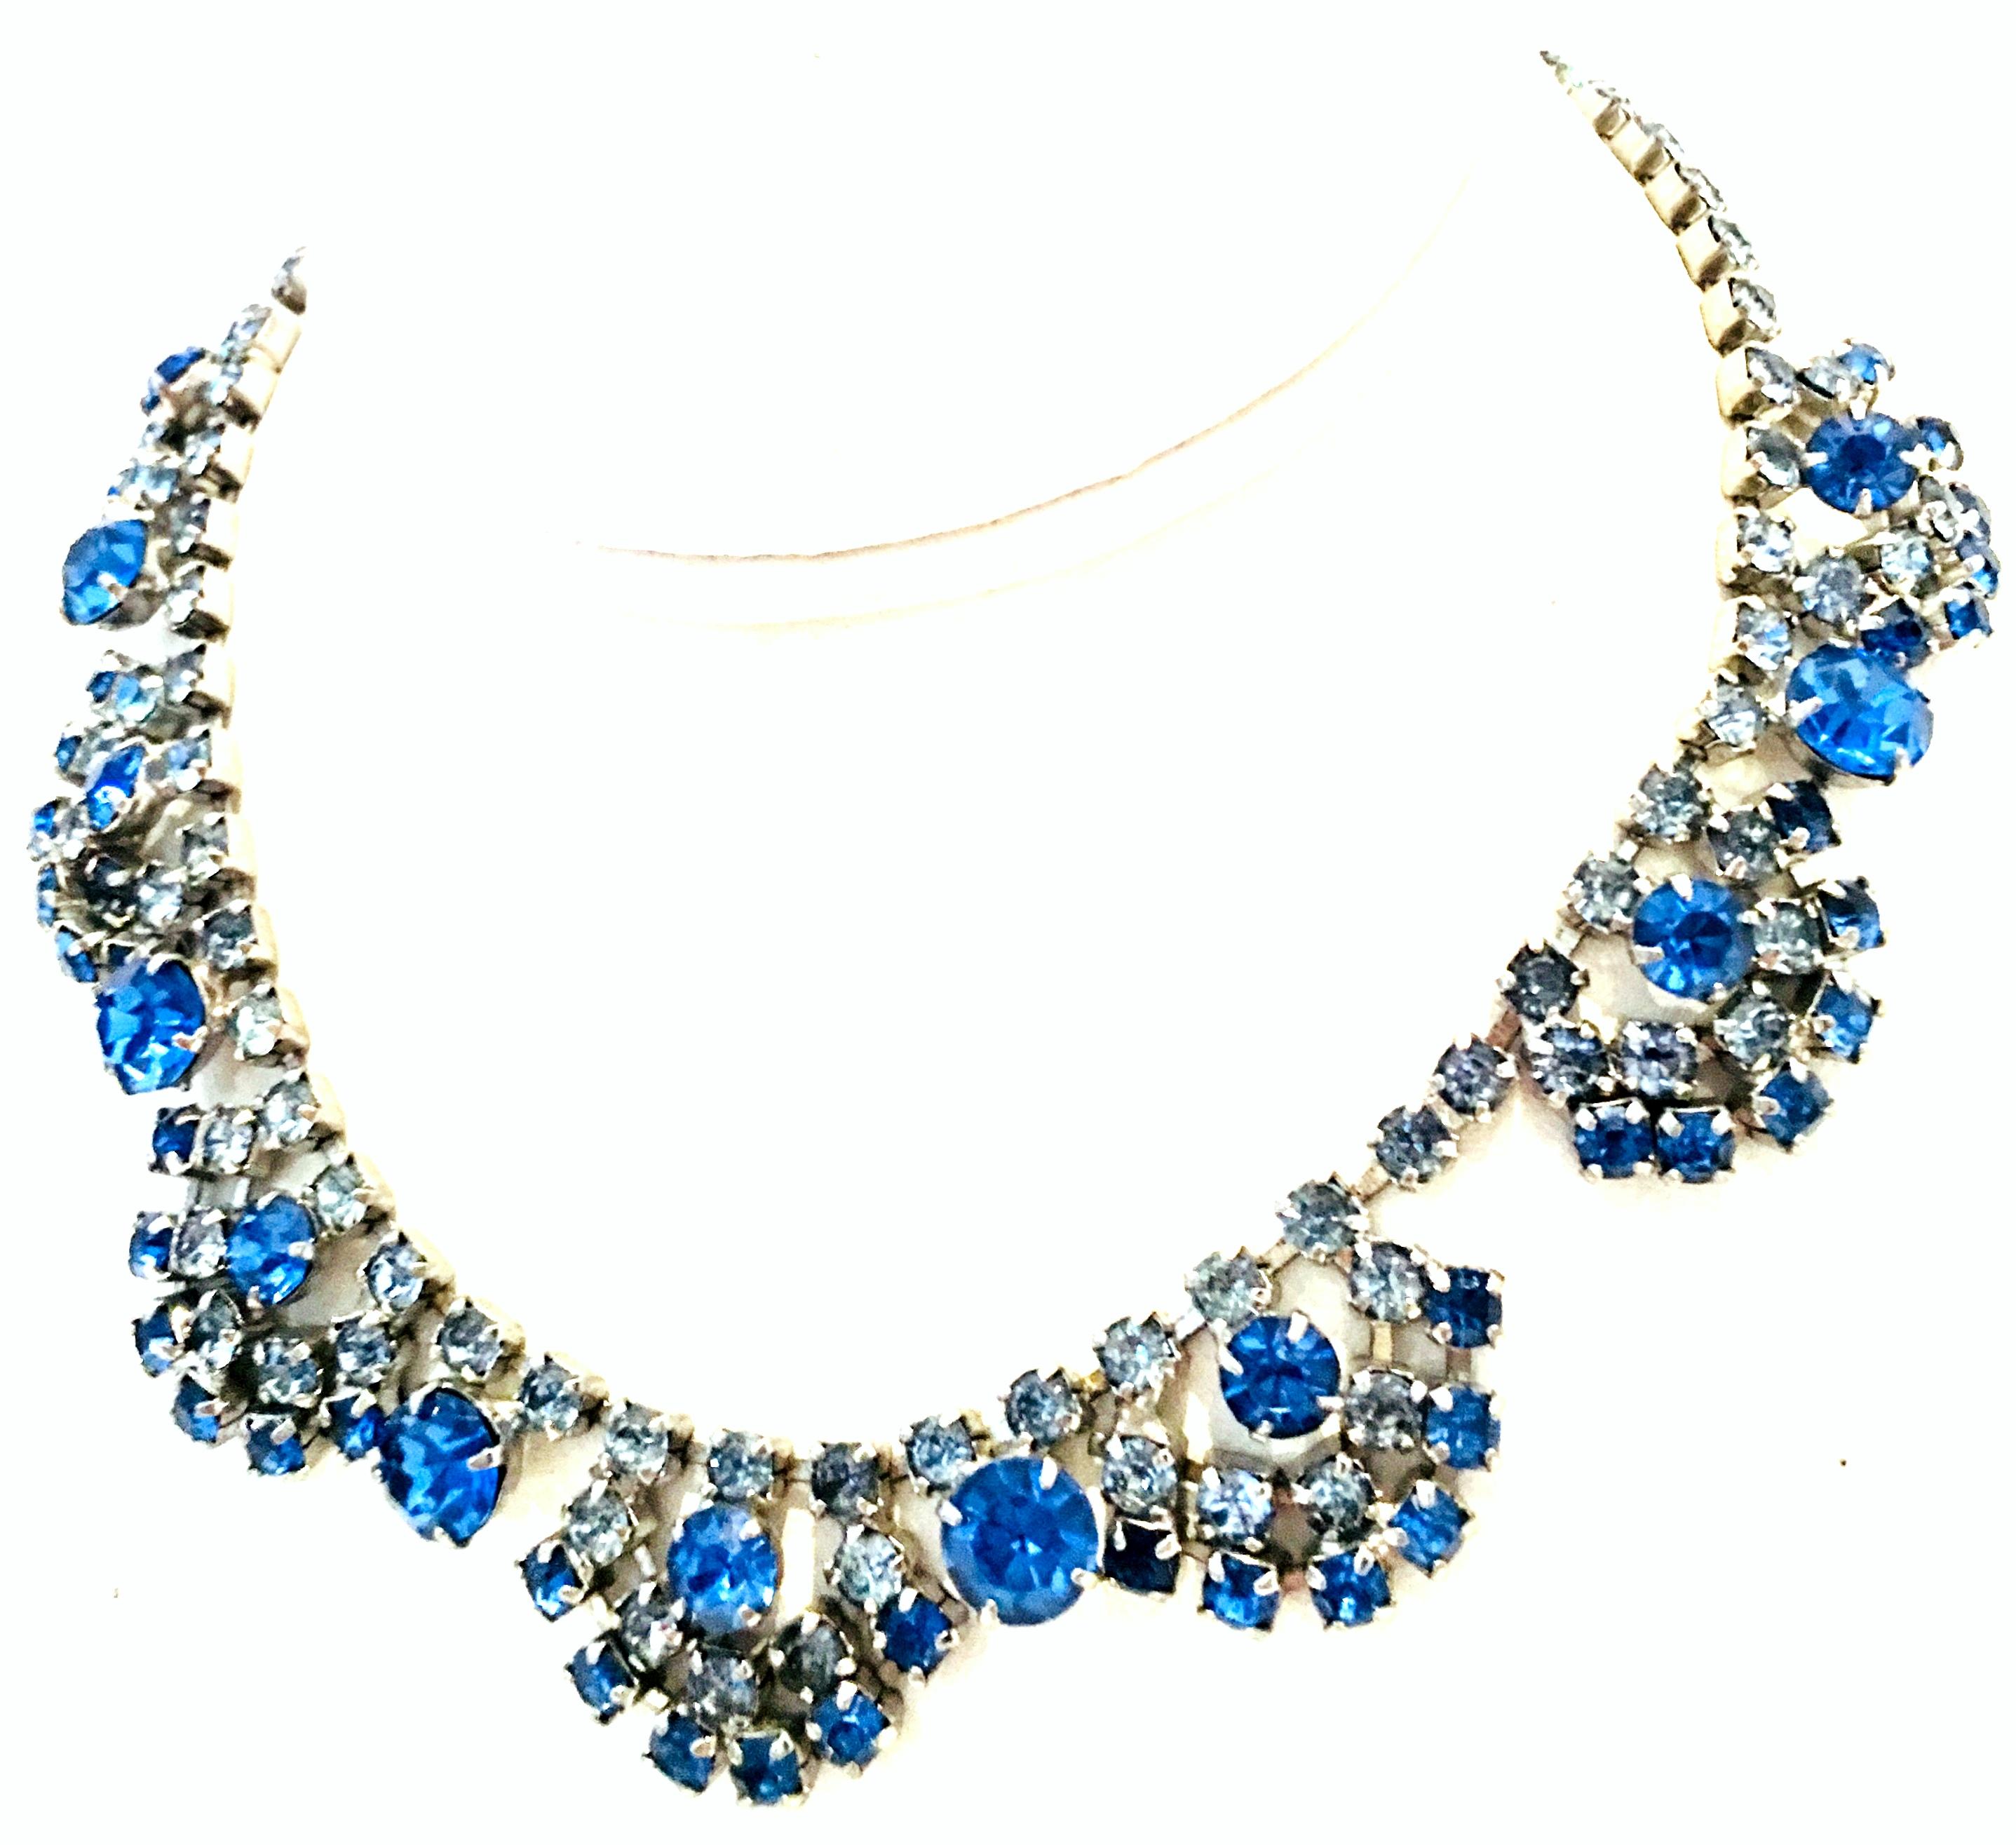 20th Century Art Deco Silver & Austrian Blue Sapphire Crystal Choker Necklace. Features silver pot metal and seven 1